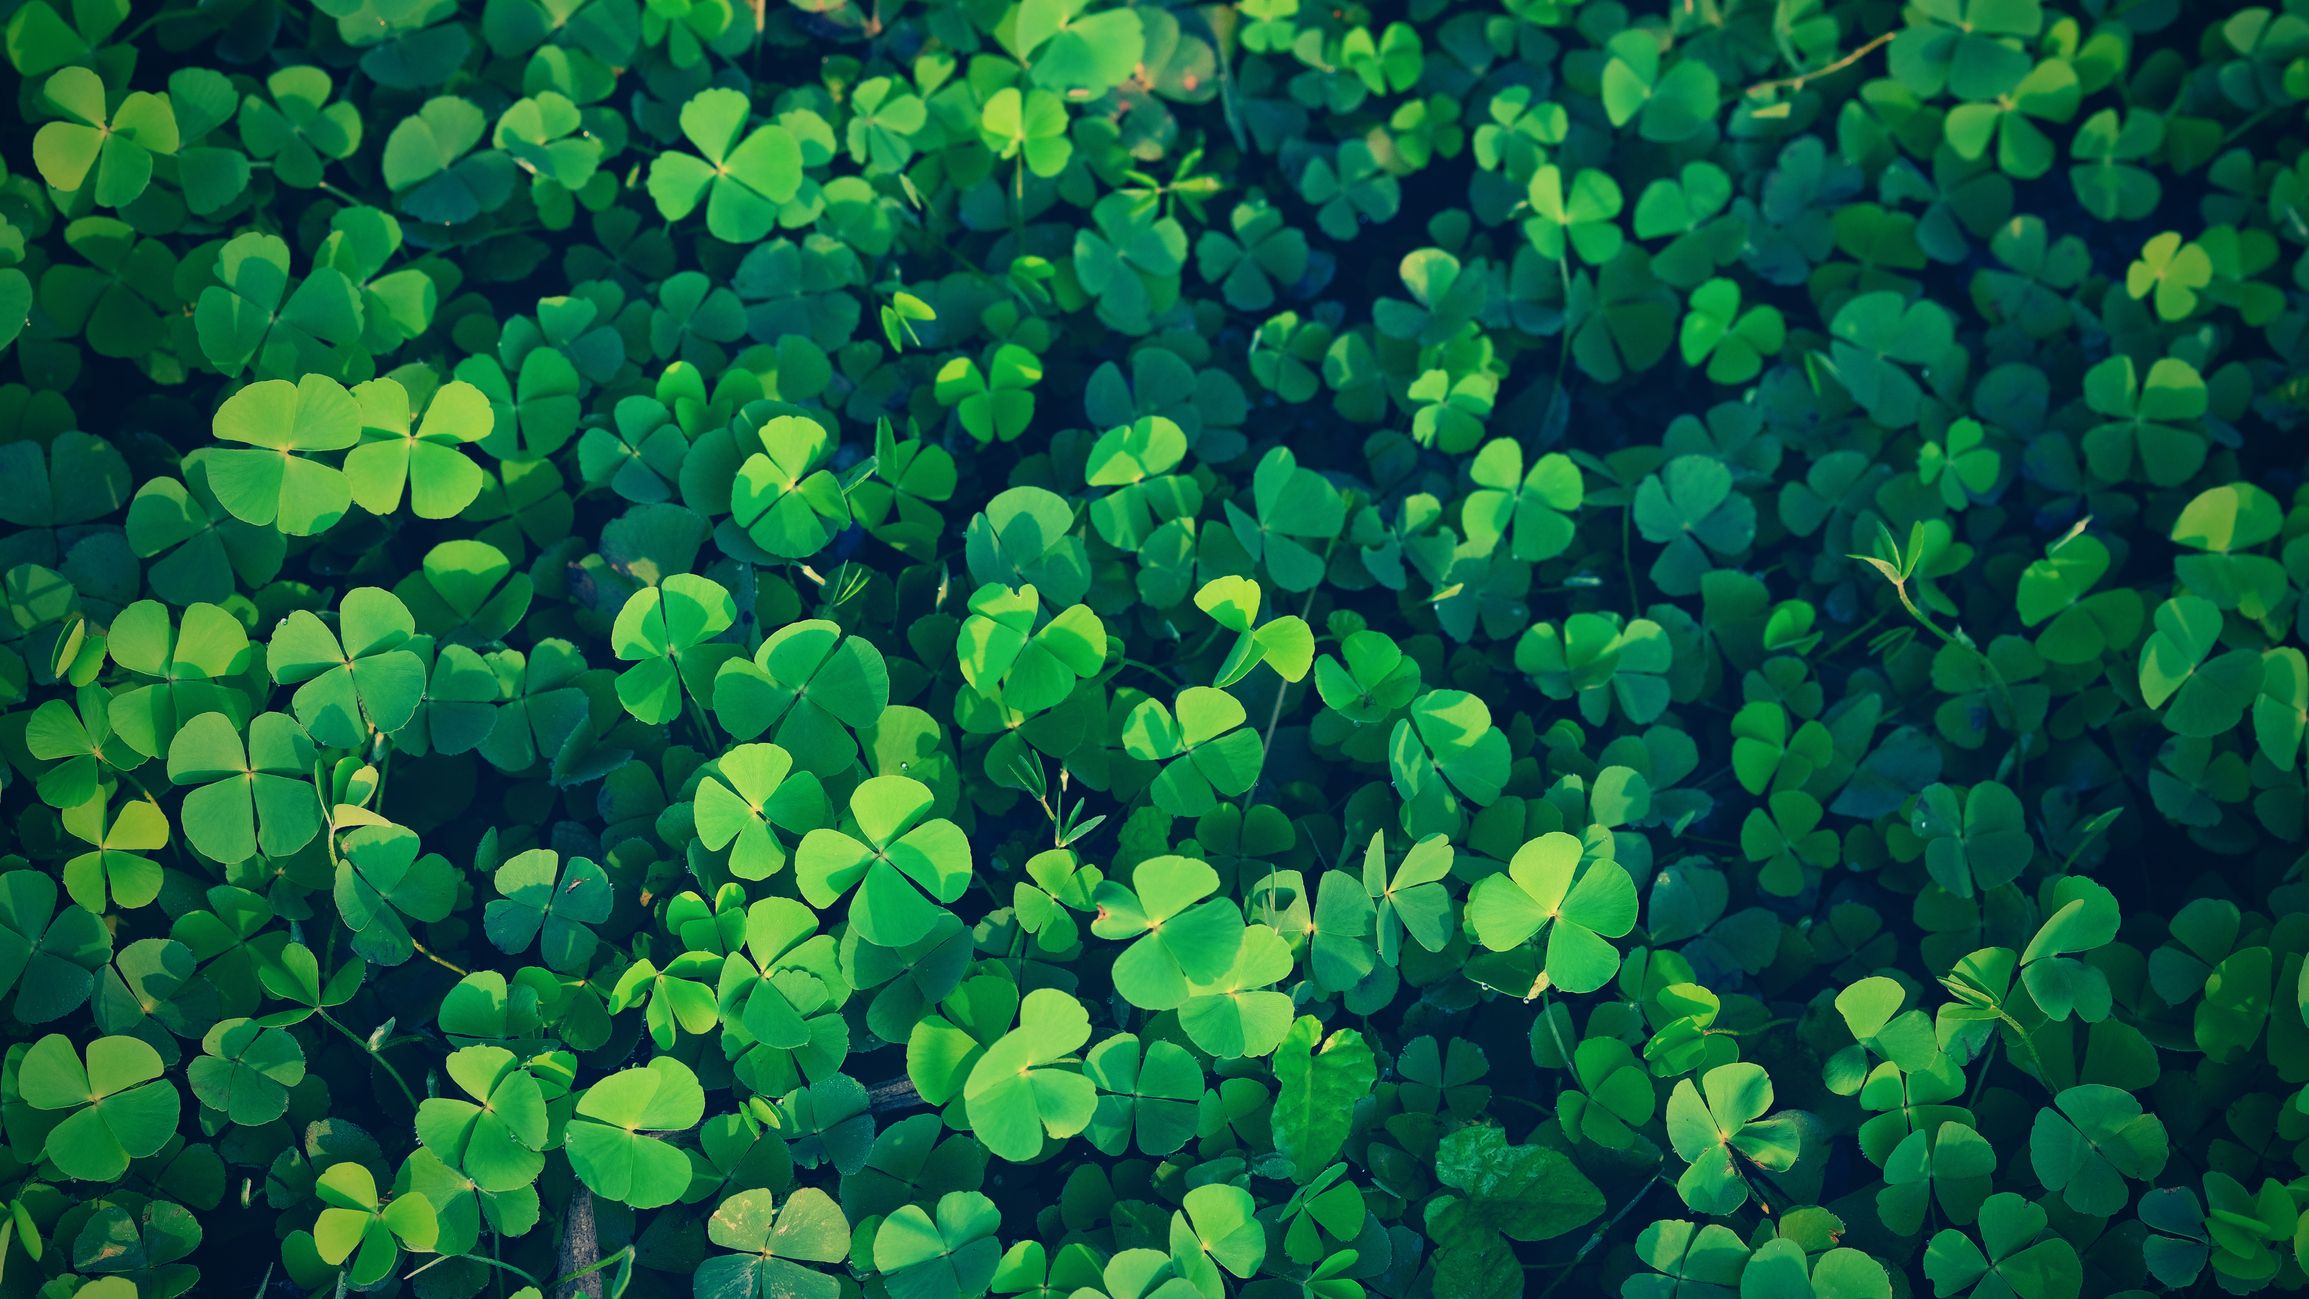 St. Patrick's Day Quotes and Irish Blessings for Good luck